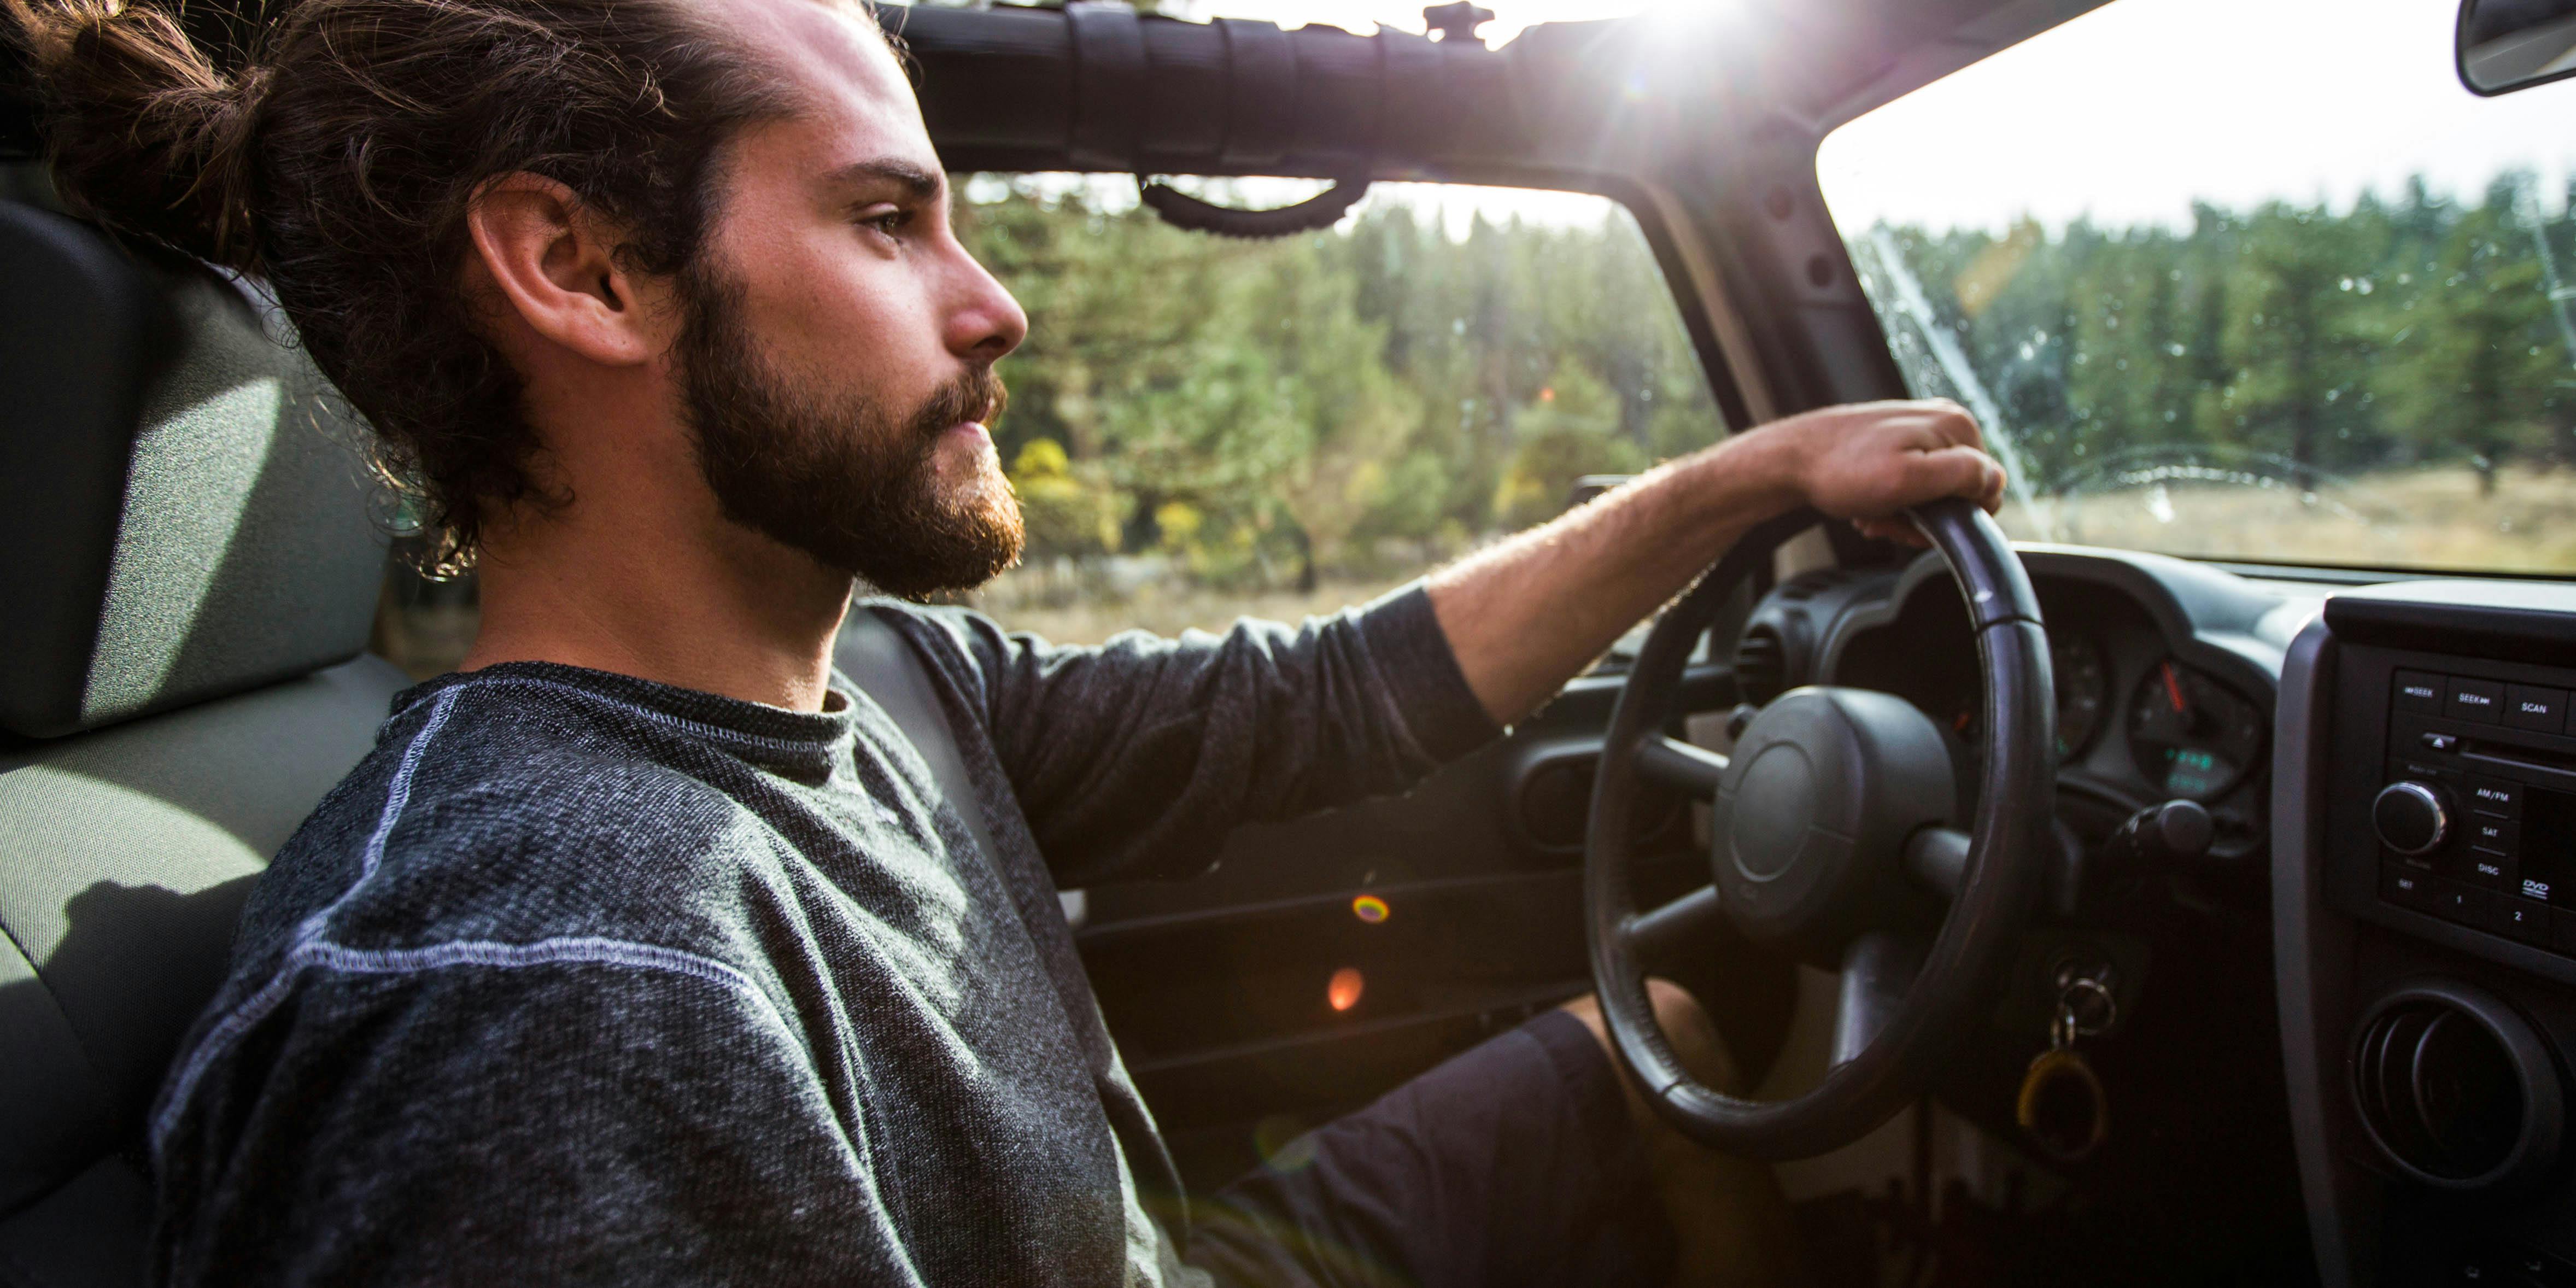 A recent survey found one in seven Canadians have driven high. Here, man is shown driving